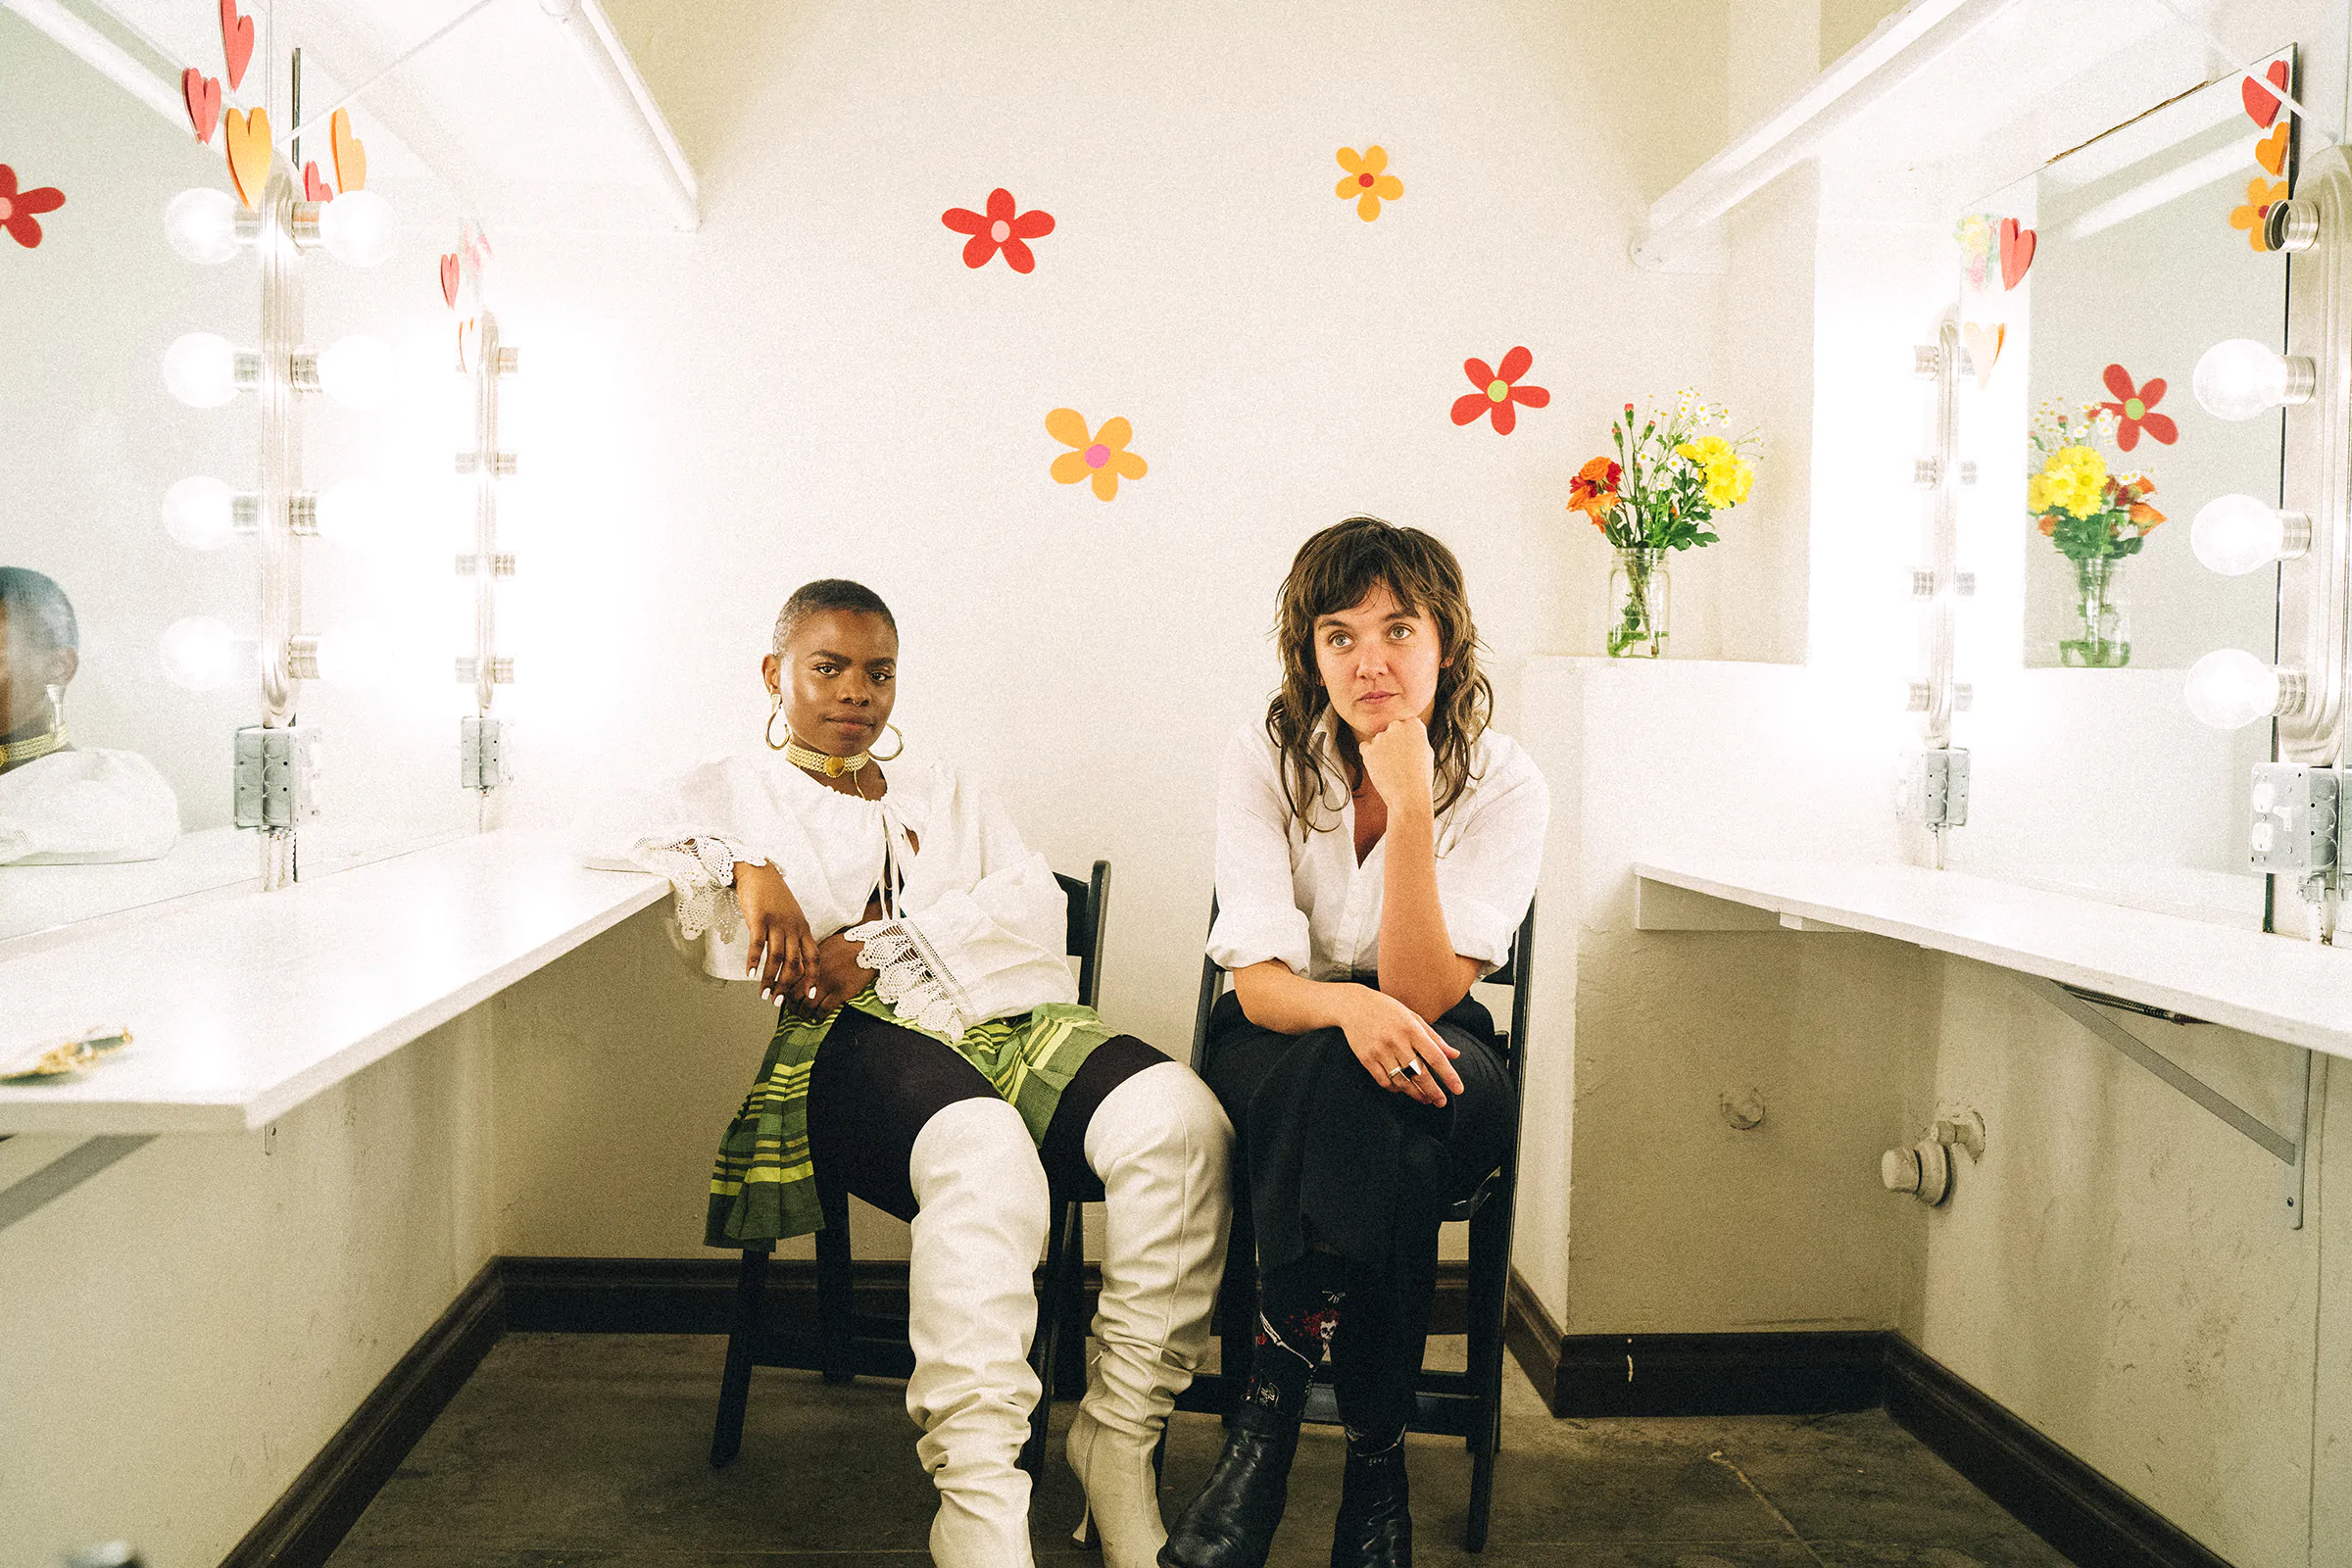 VAGABON teams up with COURTNEY BARNETT to cover ‘Reason To Believe’